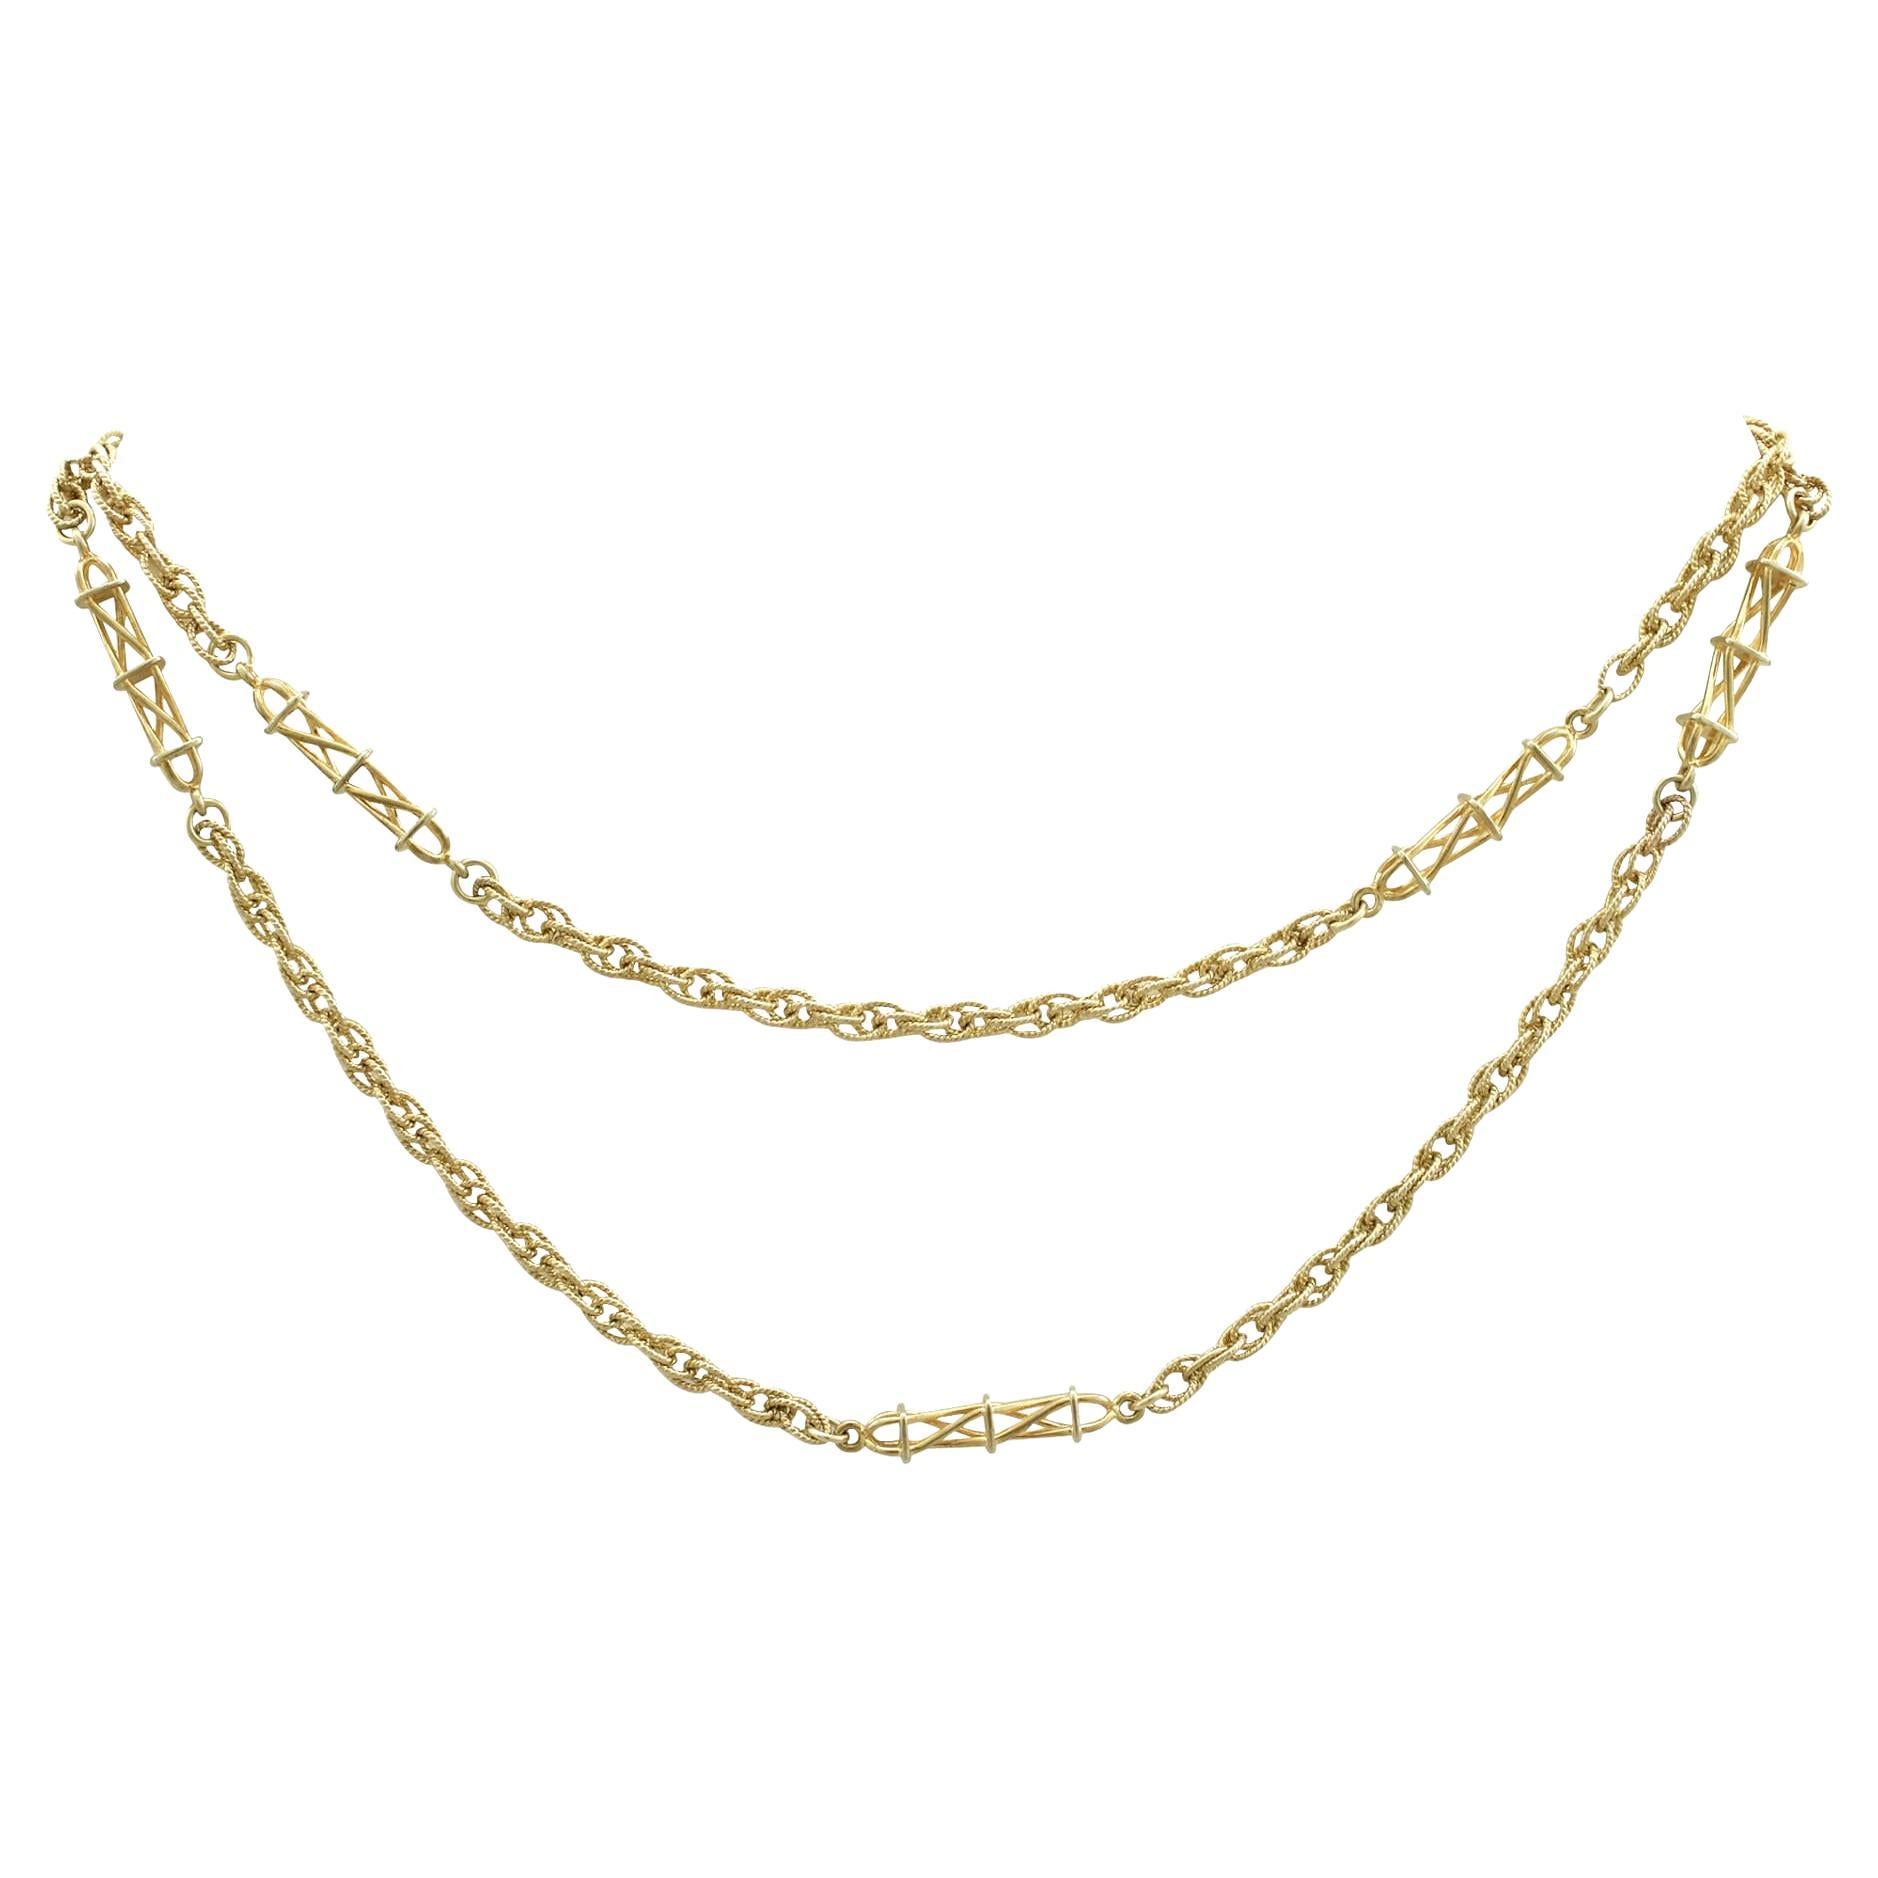 Vintage 1970s Yellow Gold Singapore Rope Chain For Sale